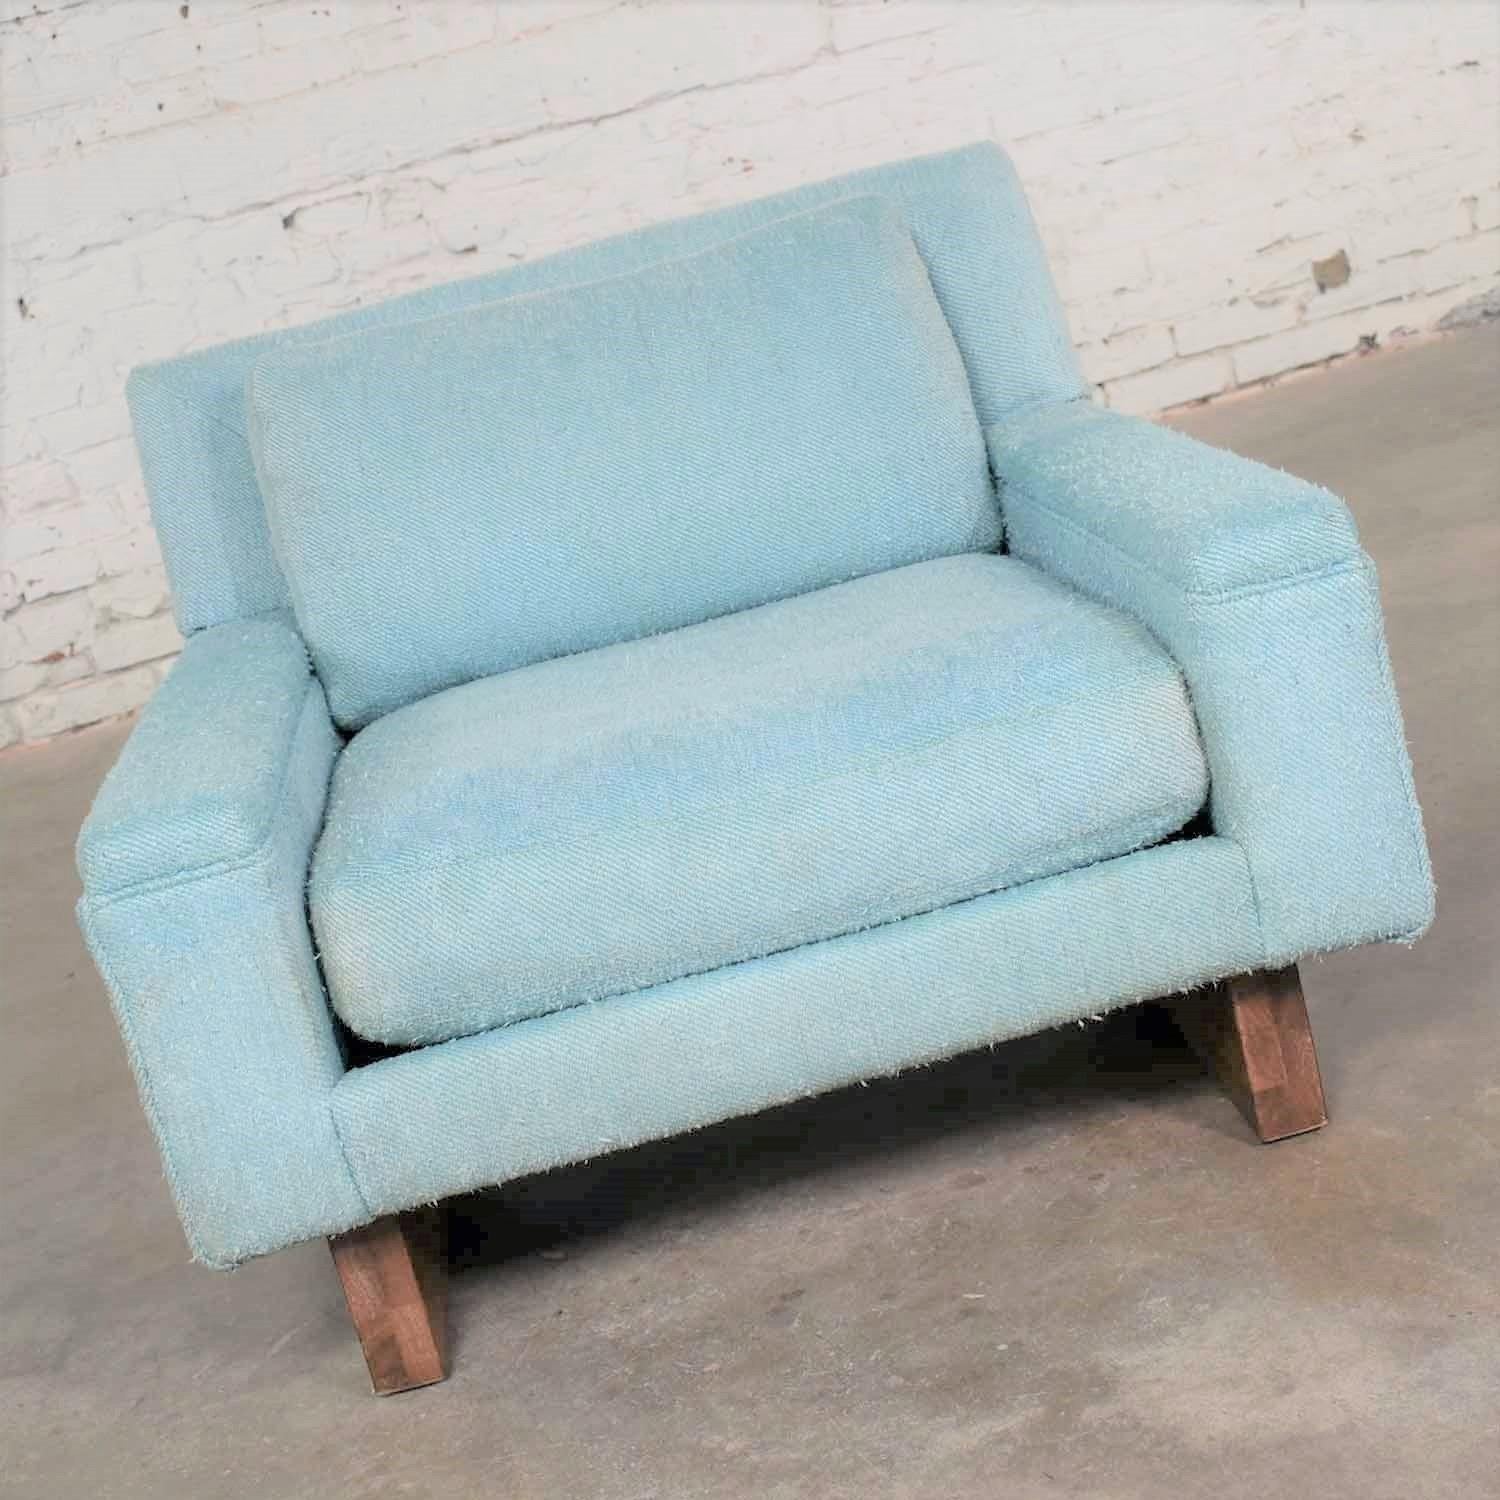 Handsome Mid-Century Modern club chair or lounge chair from the Flair Division of Bernhardt Furniture. It is in wonderful vintage condition and wearing its original light turquoise blue nubby fabric. It has been professionally cleaned but the fabric